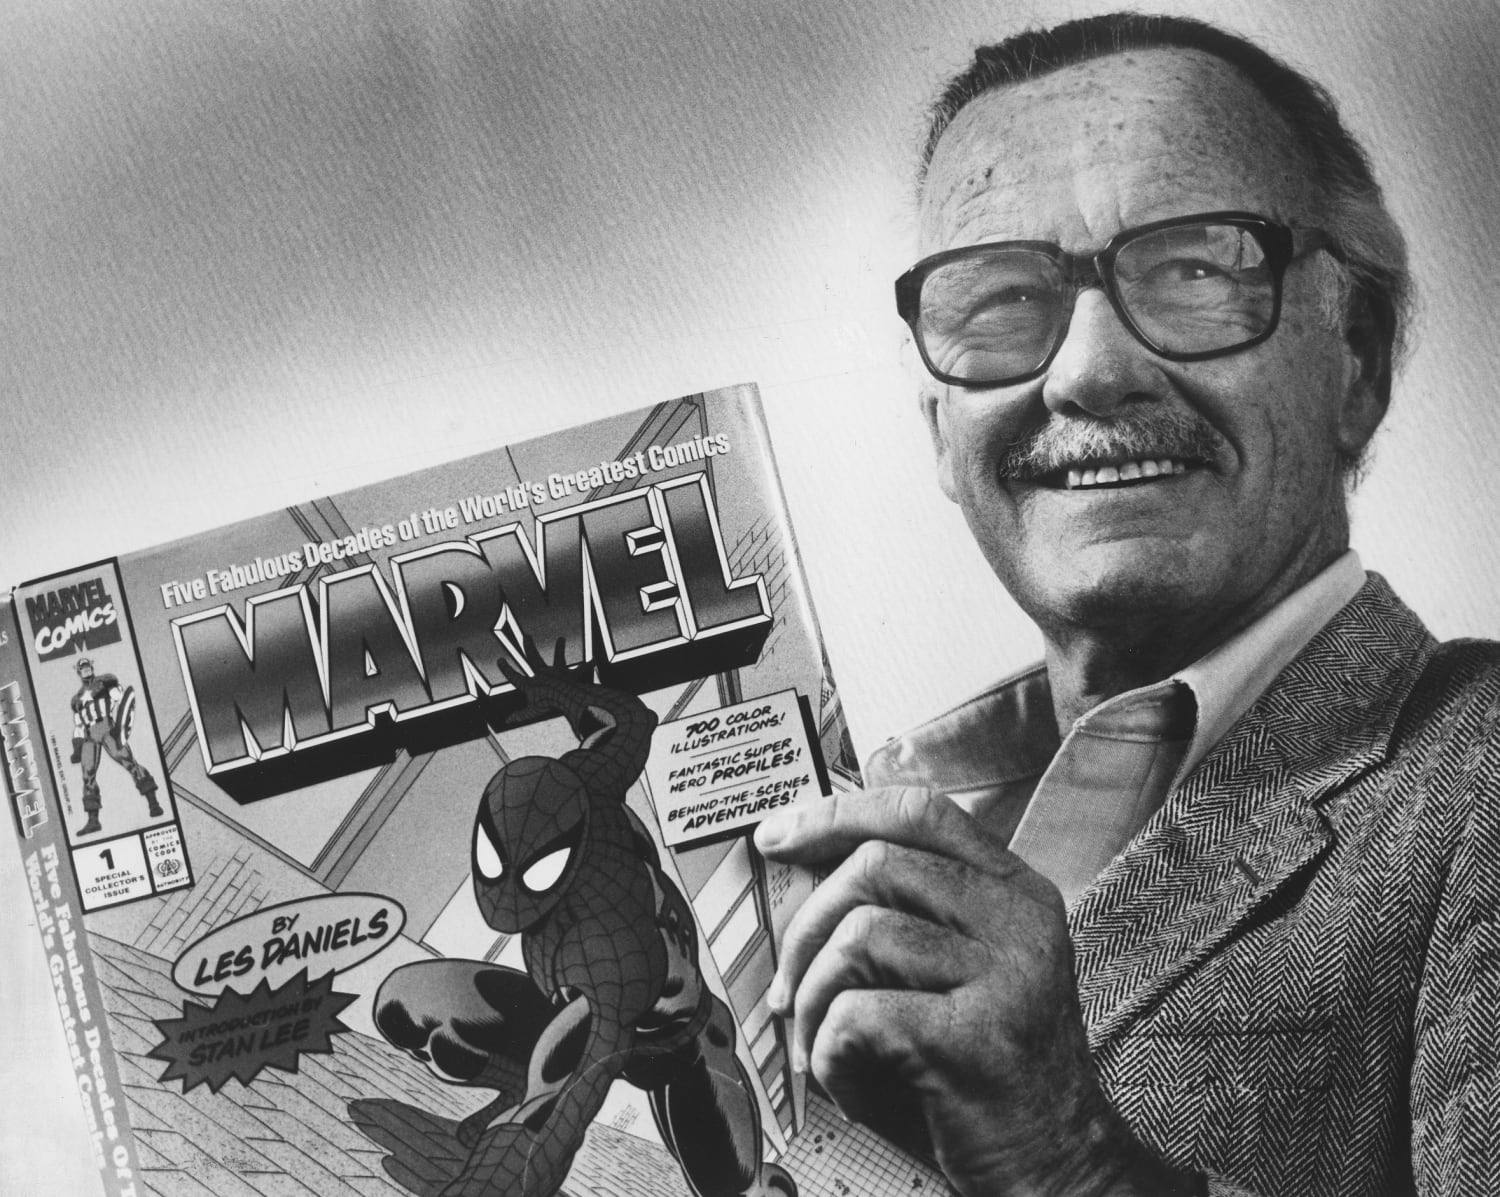 Stan Lee dead at 95: The Spider-Man co-creator leaves behind a complicated  but lasting legacy